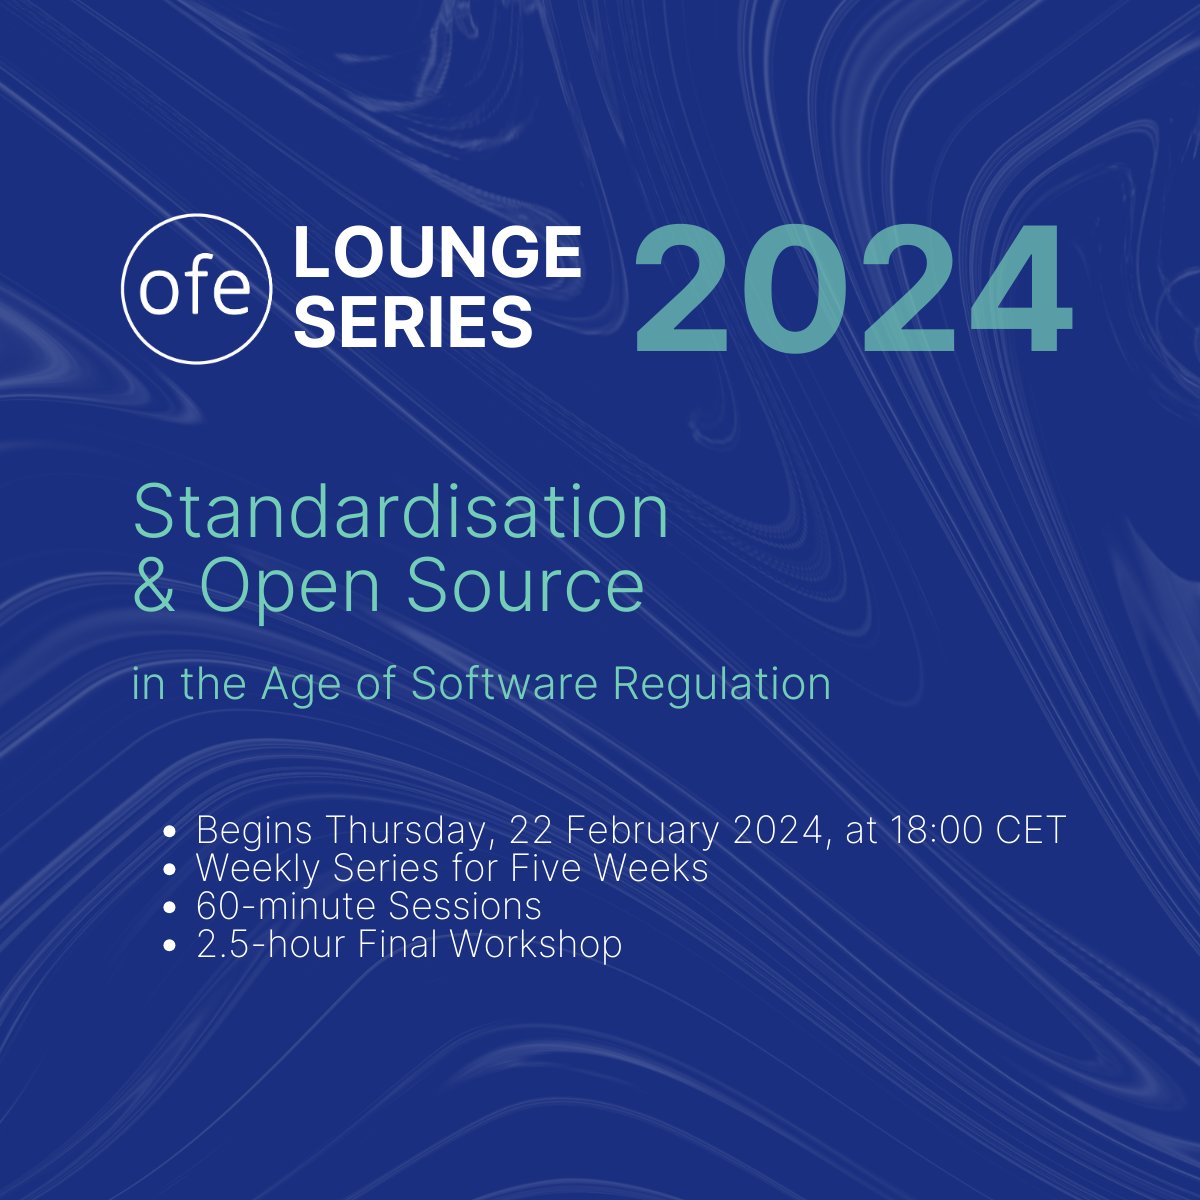 Join us and @Stand_ICT tomorrow Feb 22 for the kickoff of the OFE Lounge! Dive into the world of #Standardisation & #OpenSource in the age of software regulation. Hear from @KnutBlind @jfopen @AstorNC @emidagon @mirkoboehm 🗓️Feb 22 - Mar 21 🔗openforumeurope.org/event/ofe-loun…